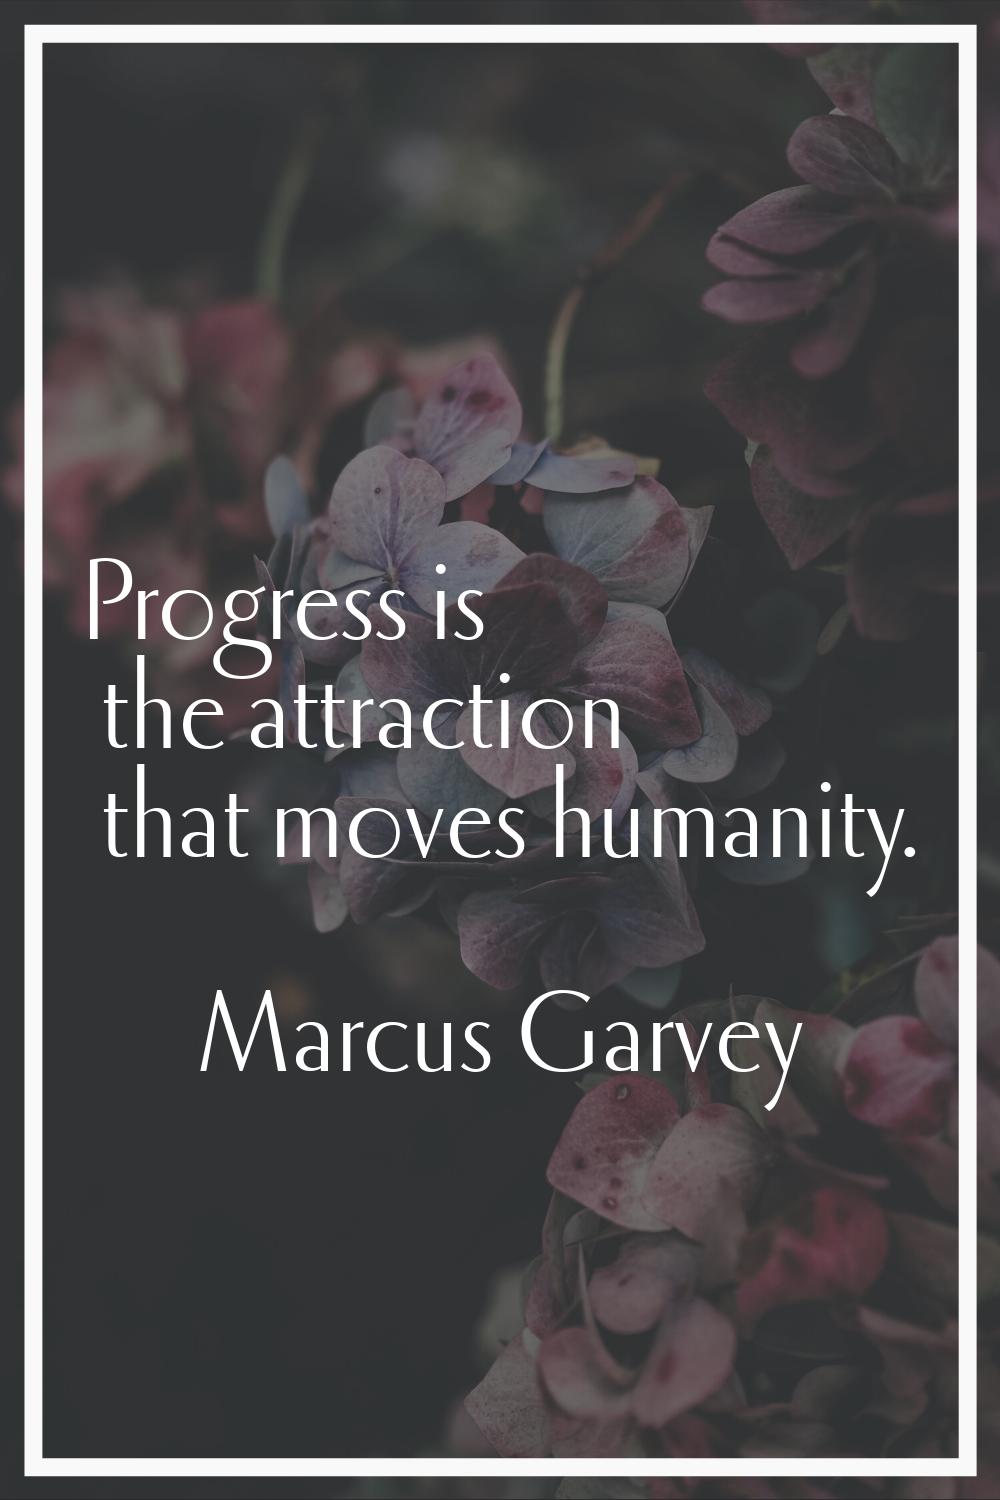 Progress is the attraction that moves humanity.